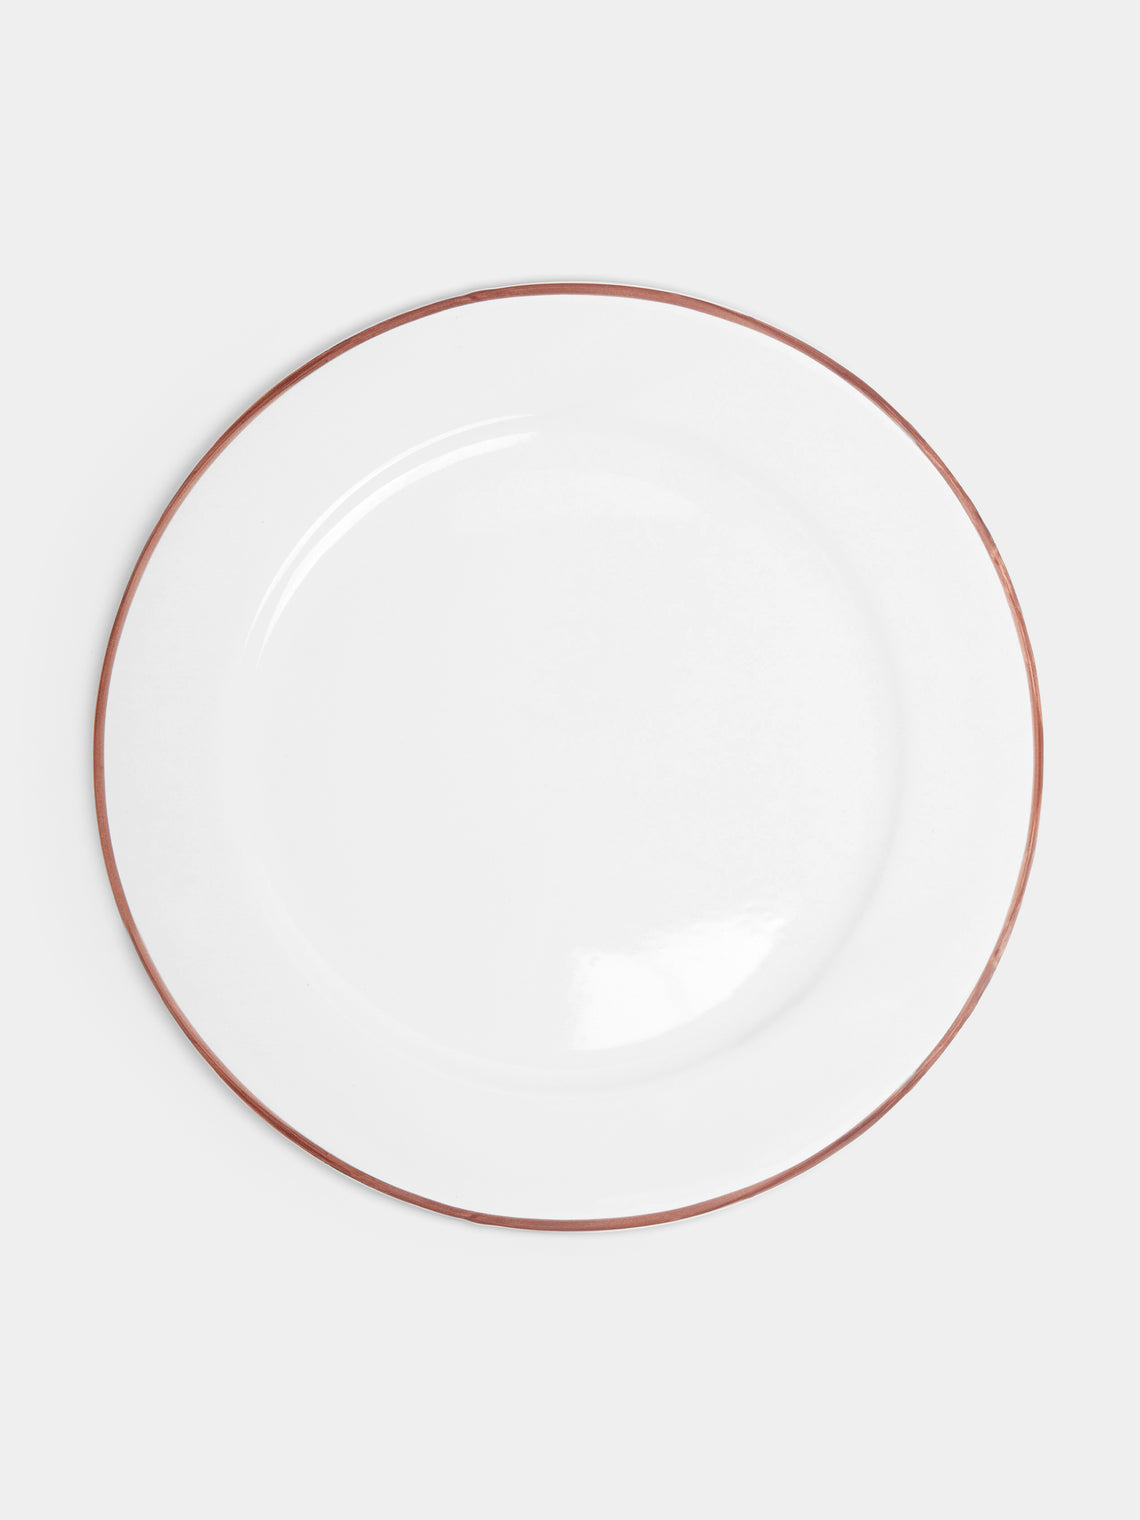 Z.d.G - L'Horizon Hand-Painted Ceramic Charger Plates (Set of 2) - Brown - ABASK - 